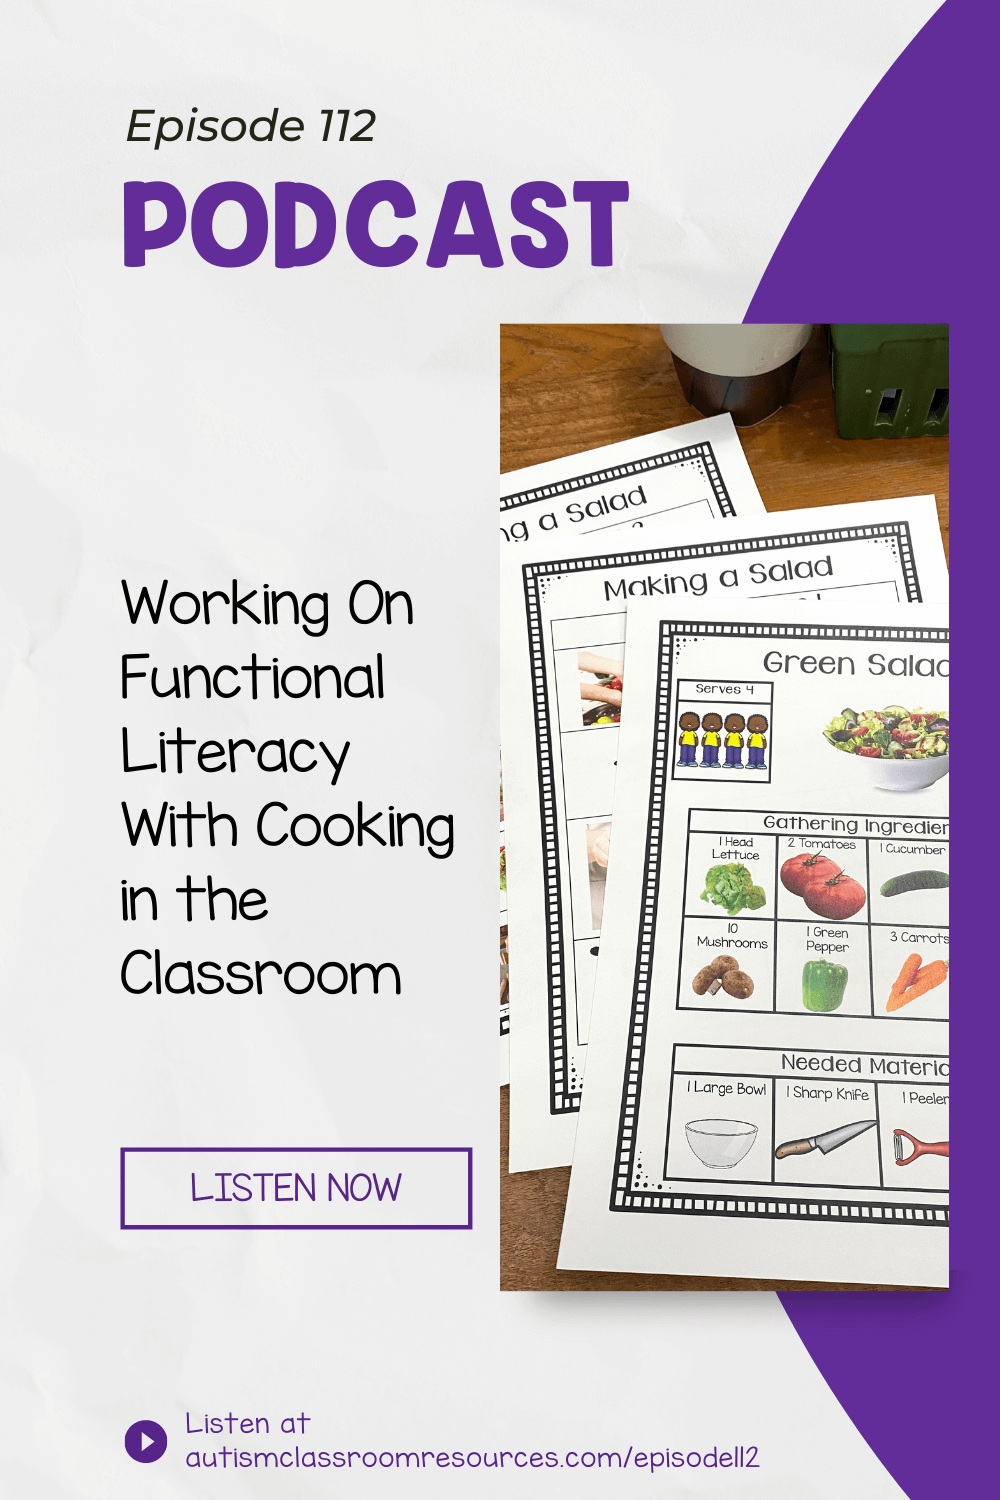 Working On Functional Literacy With Cooking in the Classroom